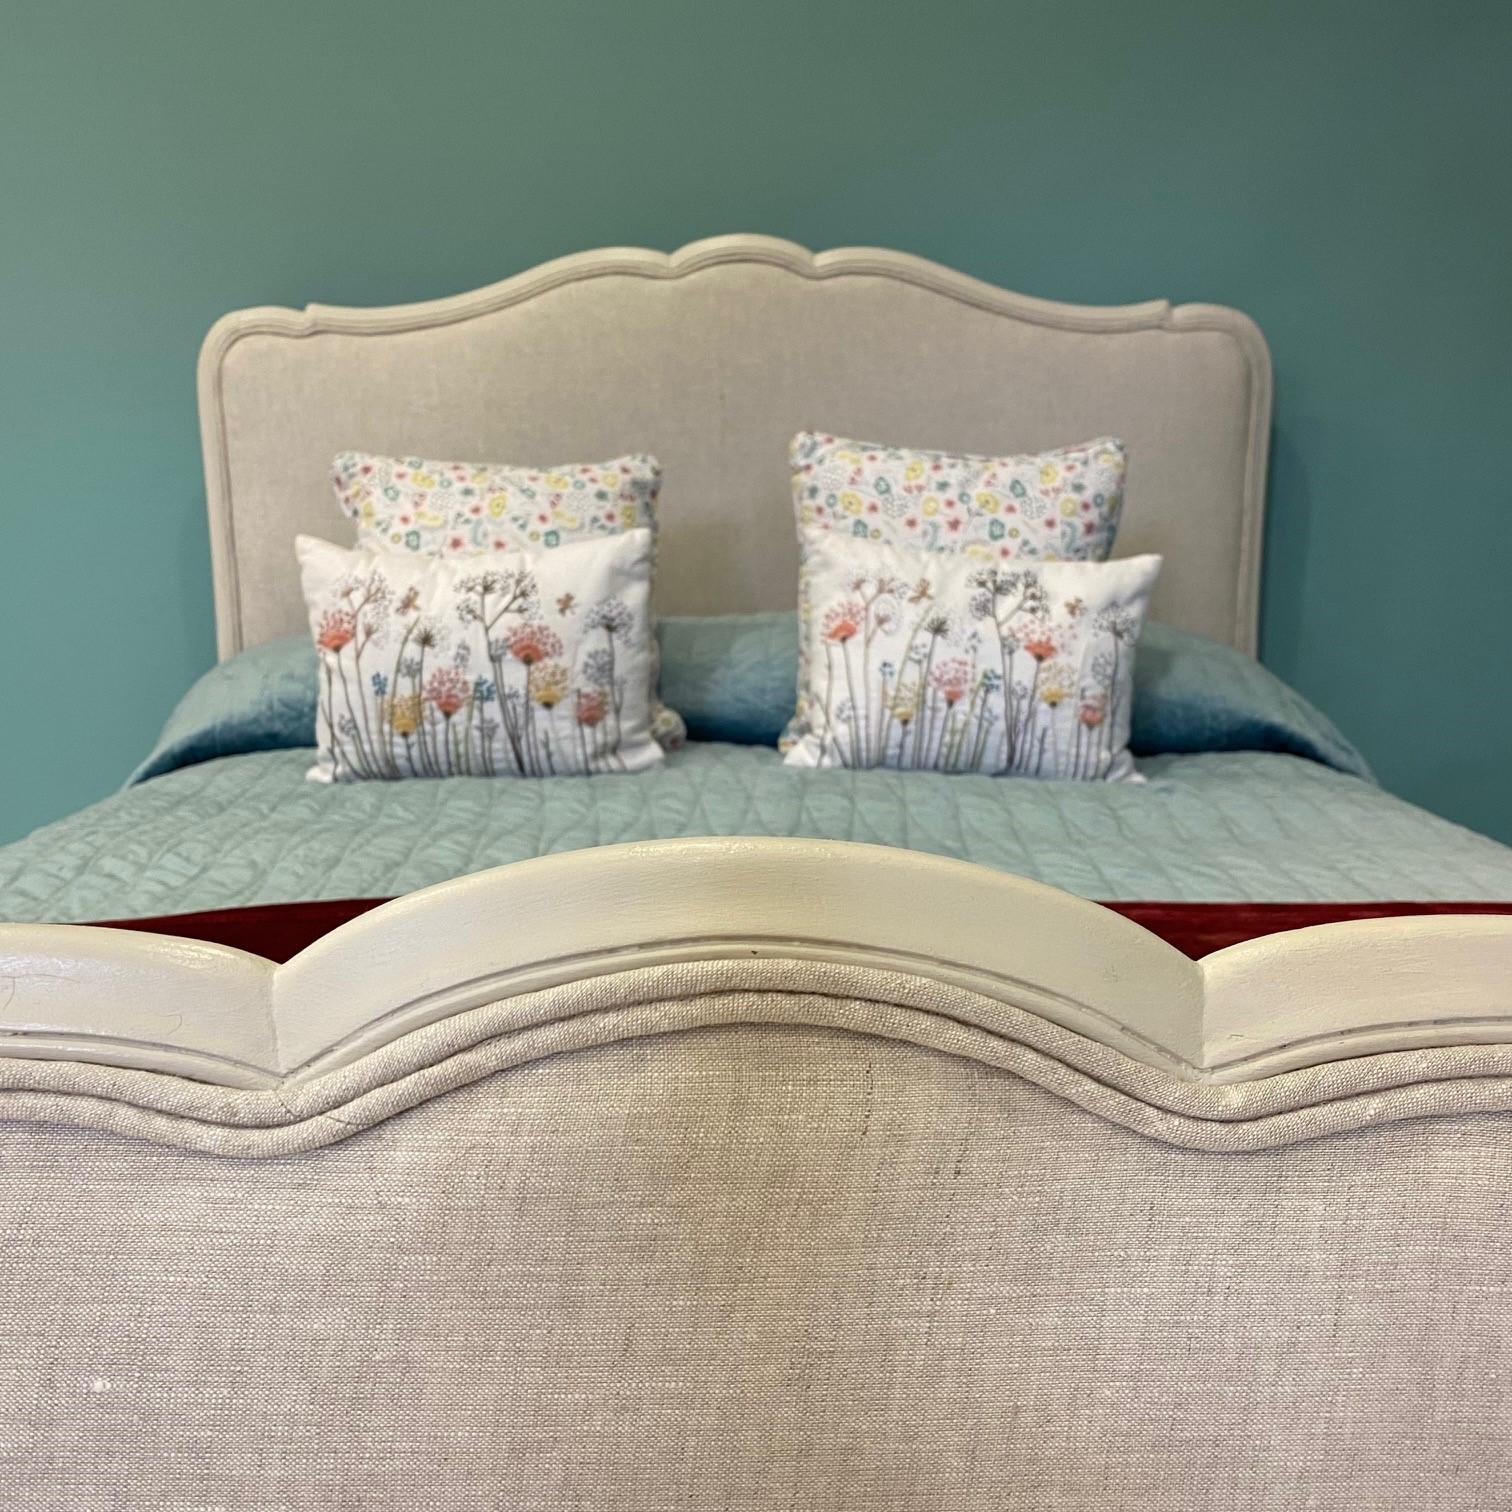 This charming French Antique double (4’6) upholstered bedframe has been newly upholstered in a neutral linen fabric. The frame has been finished with double piping in the same fabric to compliment the painted frame. the bed comes complete with a new